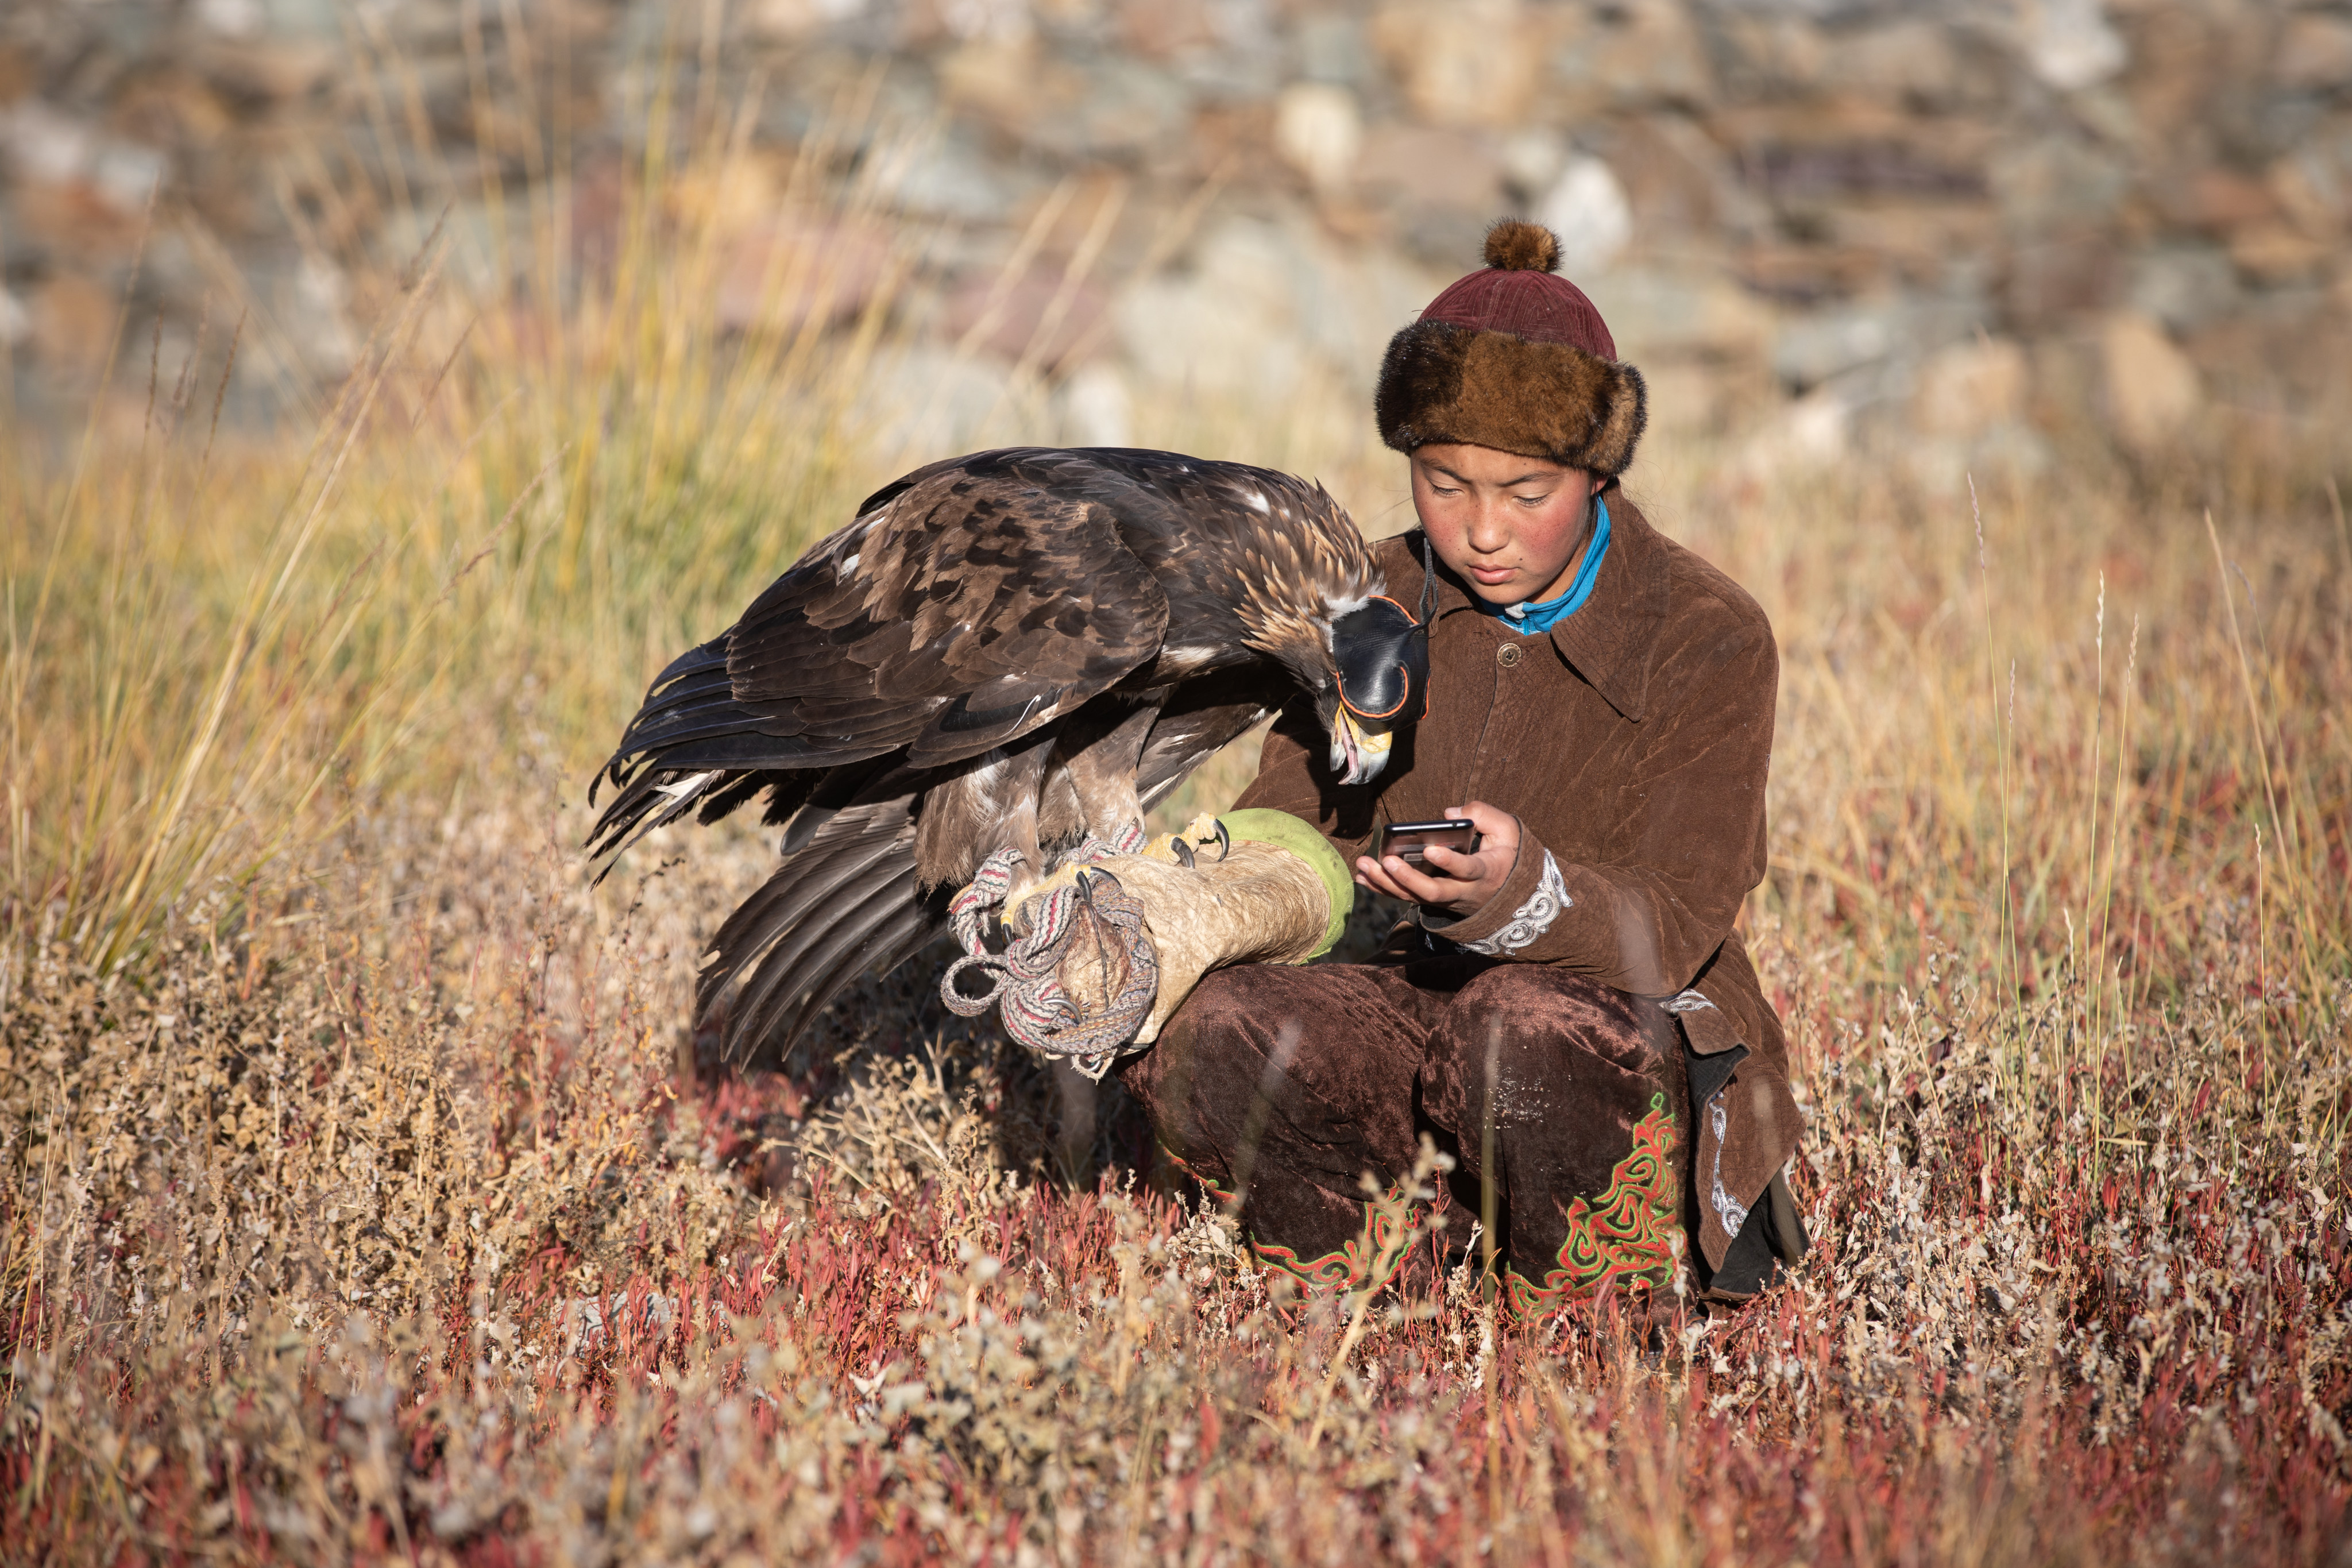 A traditional Kazakh eagle hunter in Ulgii, Western Mongolia, watches her mobile phone with her golden eagle, which she uses to hunt foxes and rabbits for their fur. Broadband internet is helping preserve nomadic culture on the Mongolian steppe. Photo: Getty Images